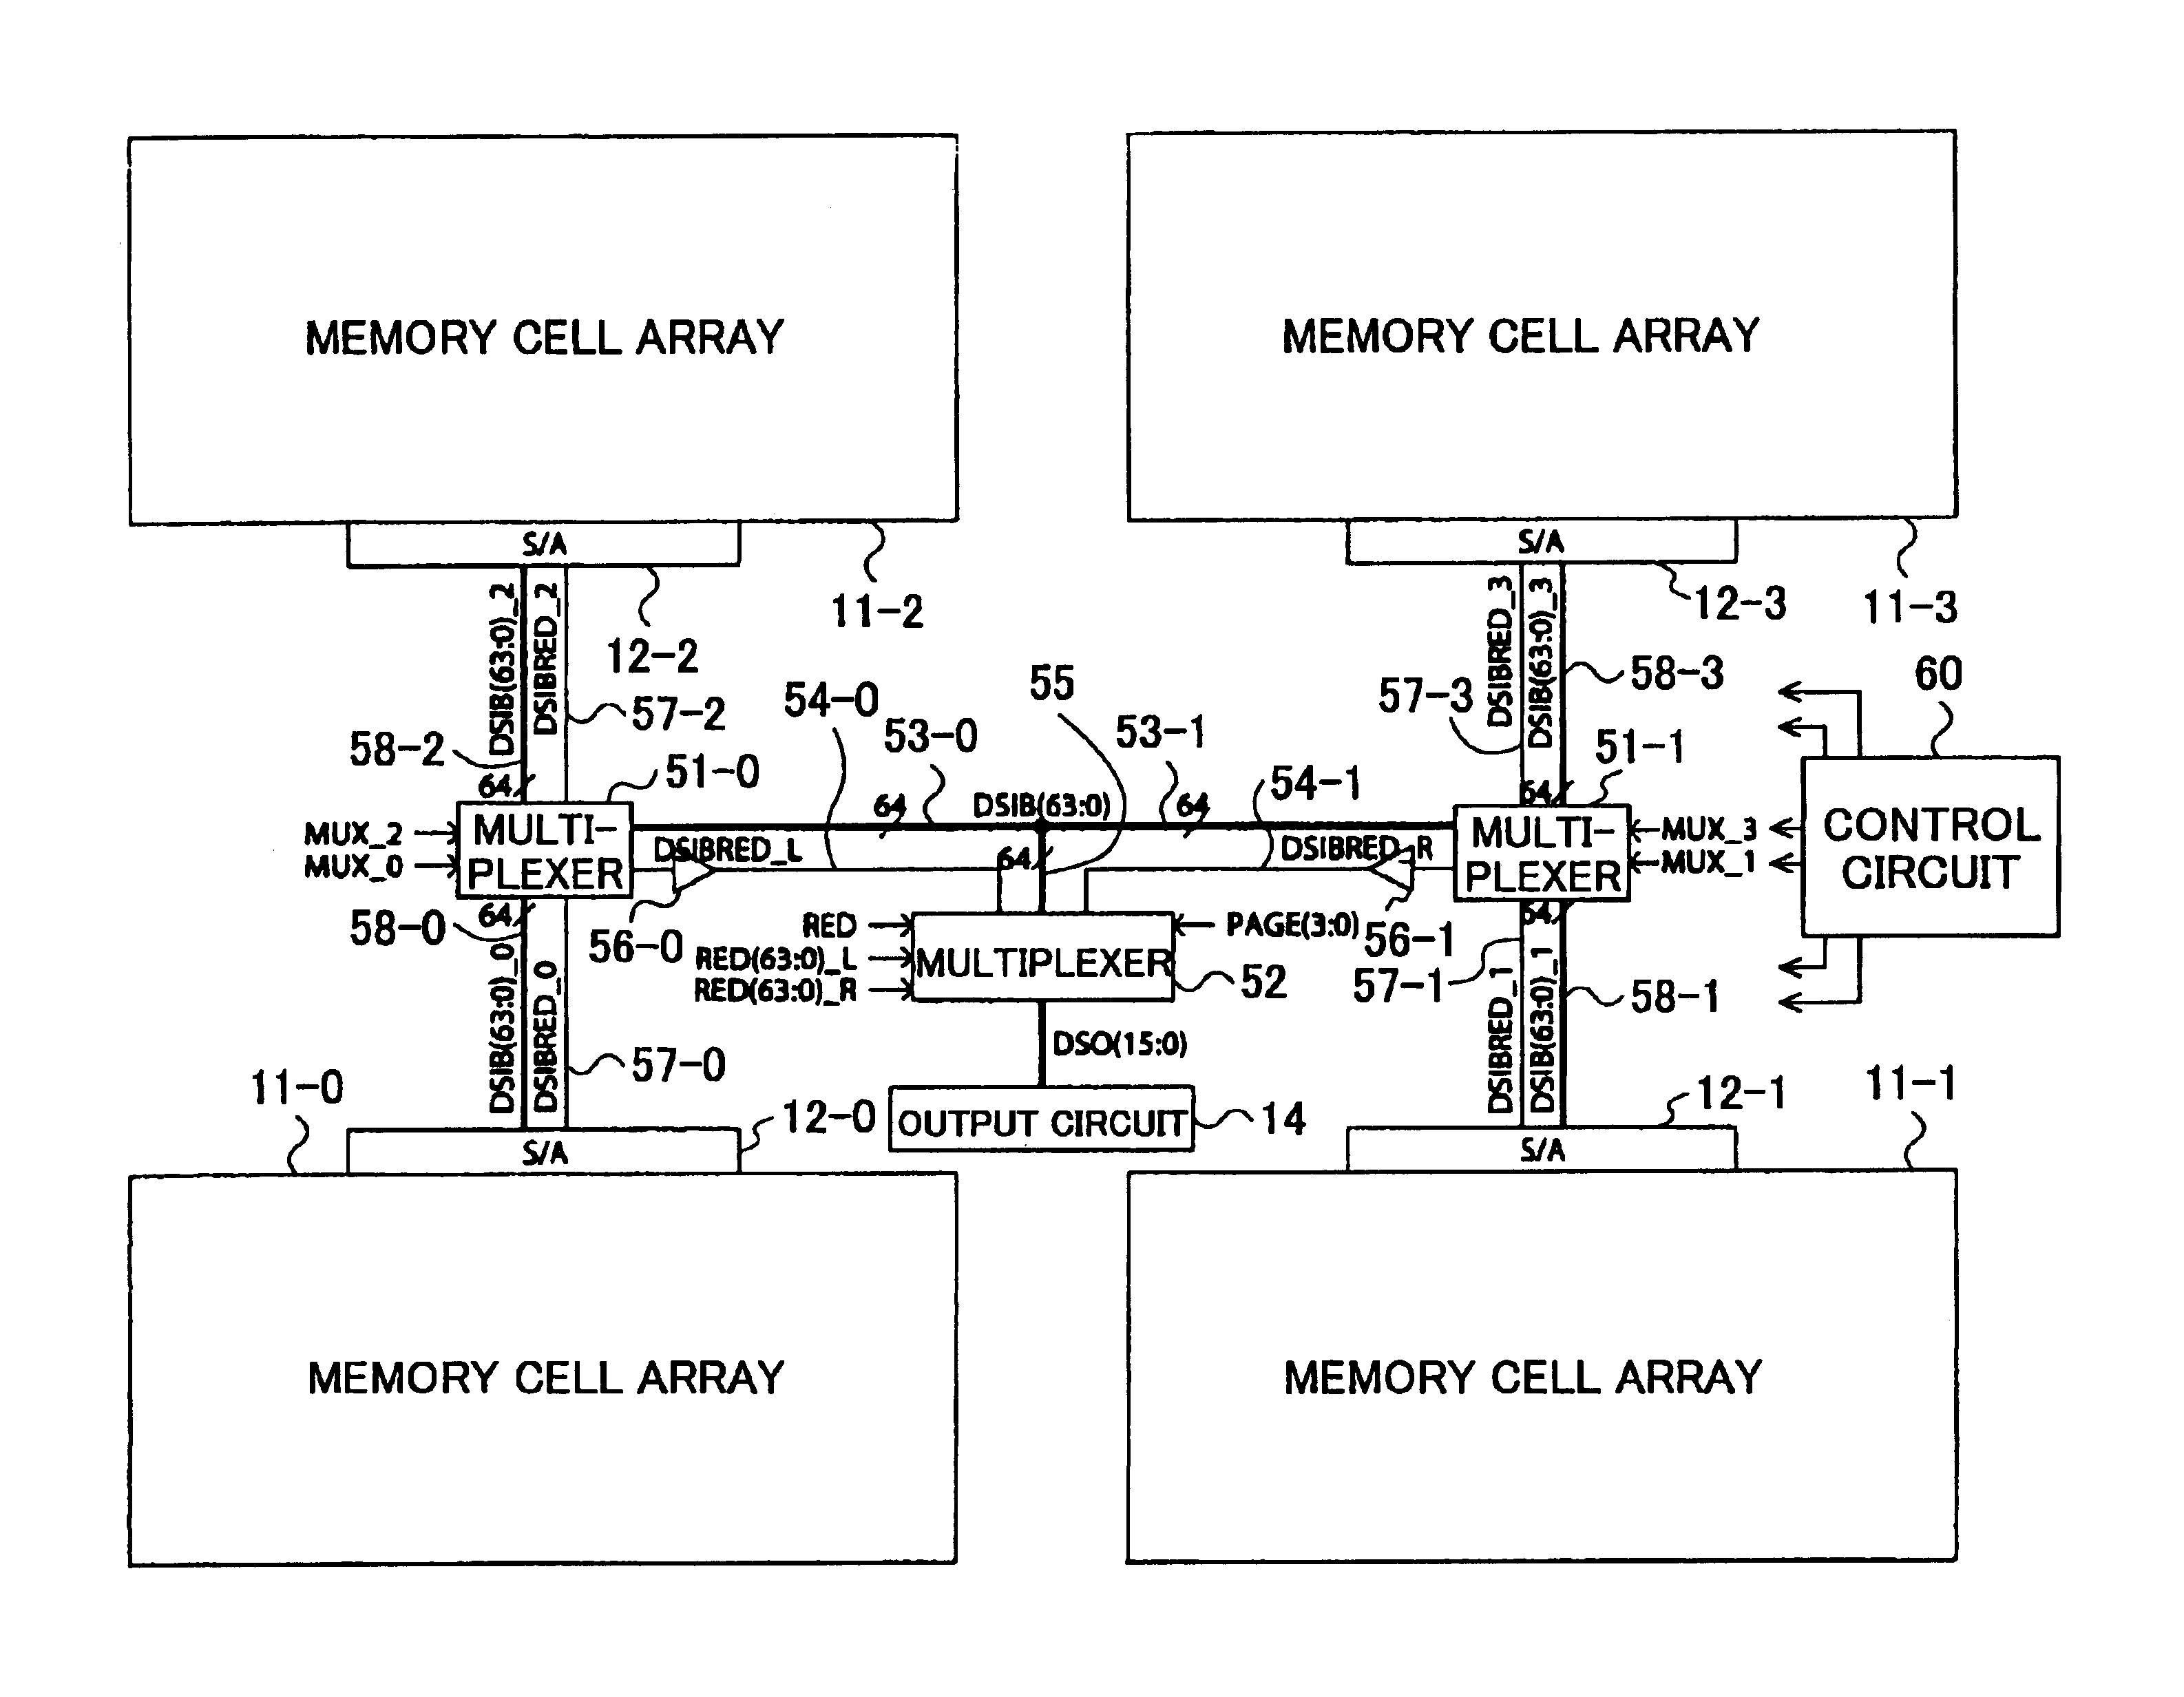 Semiconductor memory device with memory cell array divided into blocks